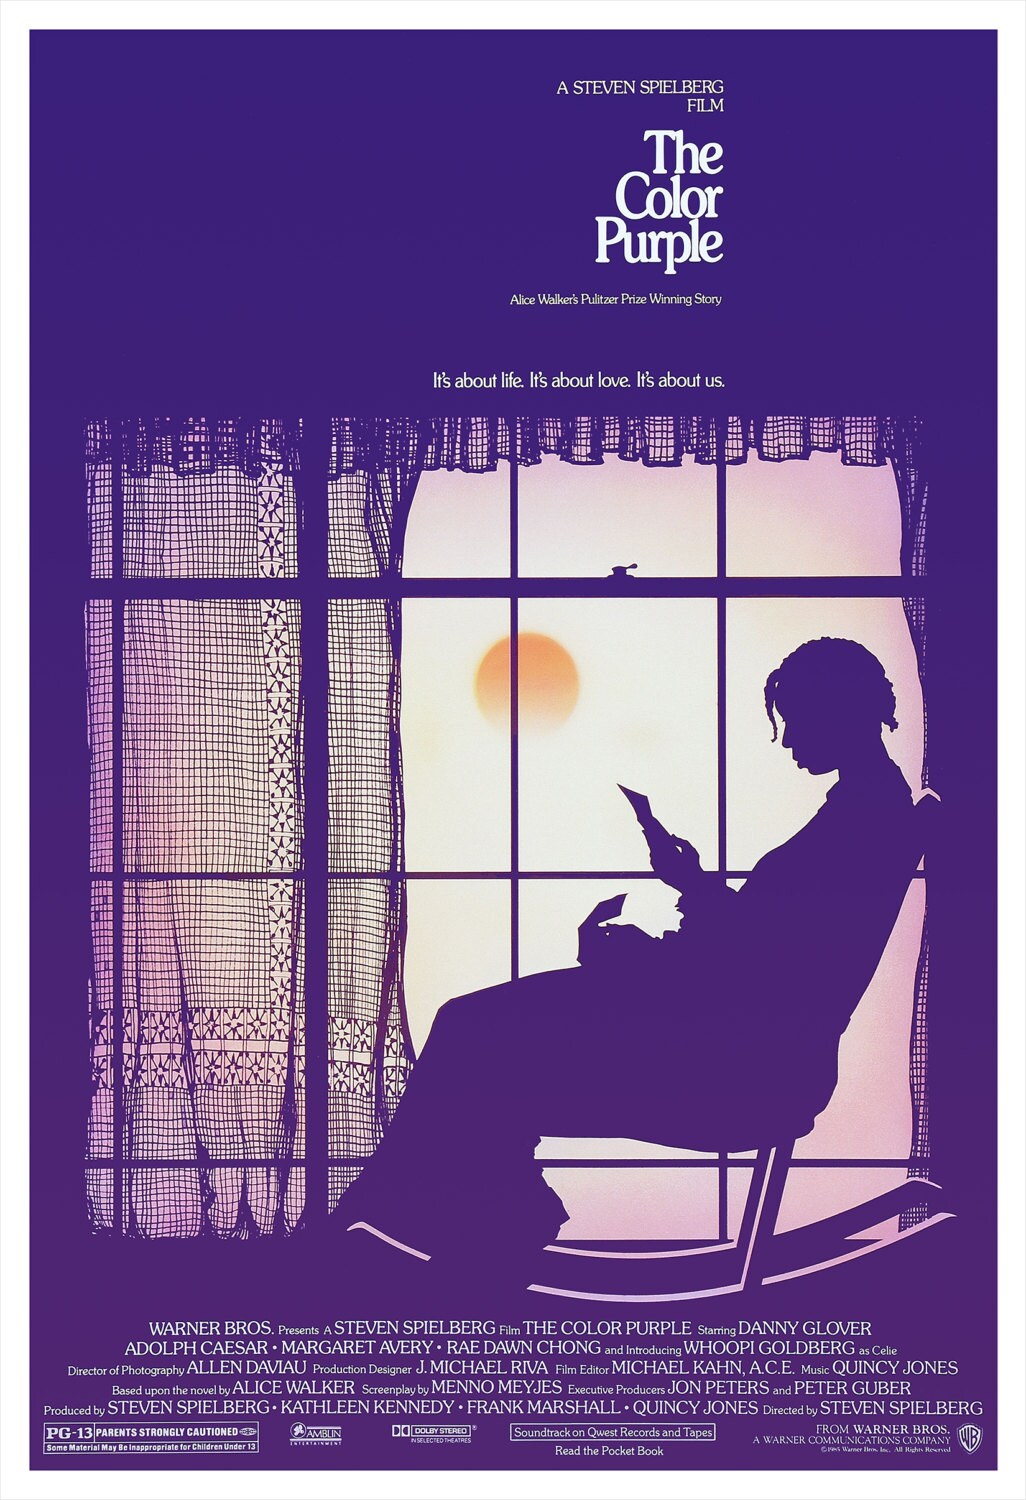 The Color Purple Movie Poster Print 13x19 or